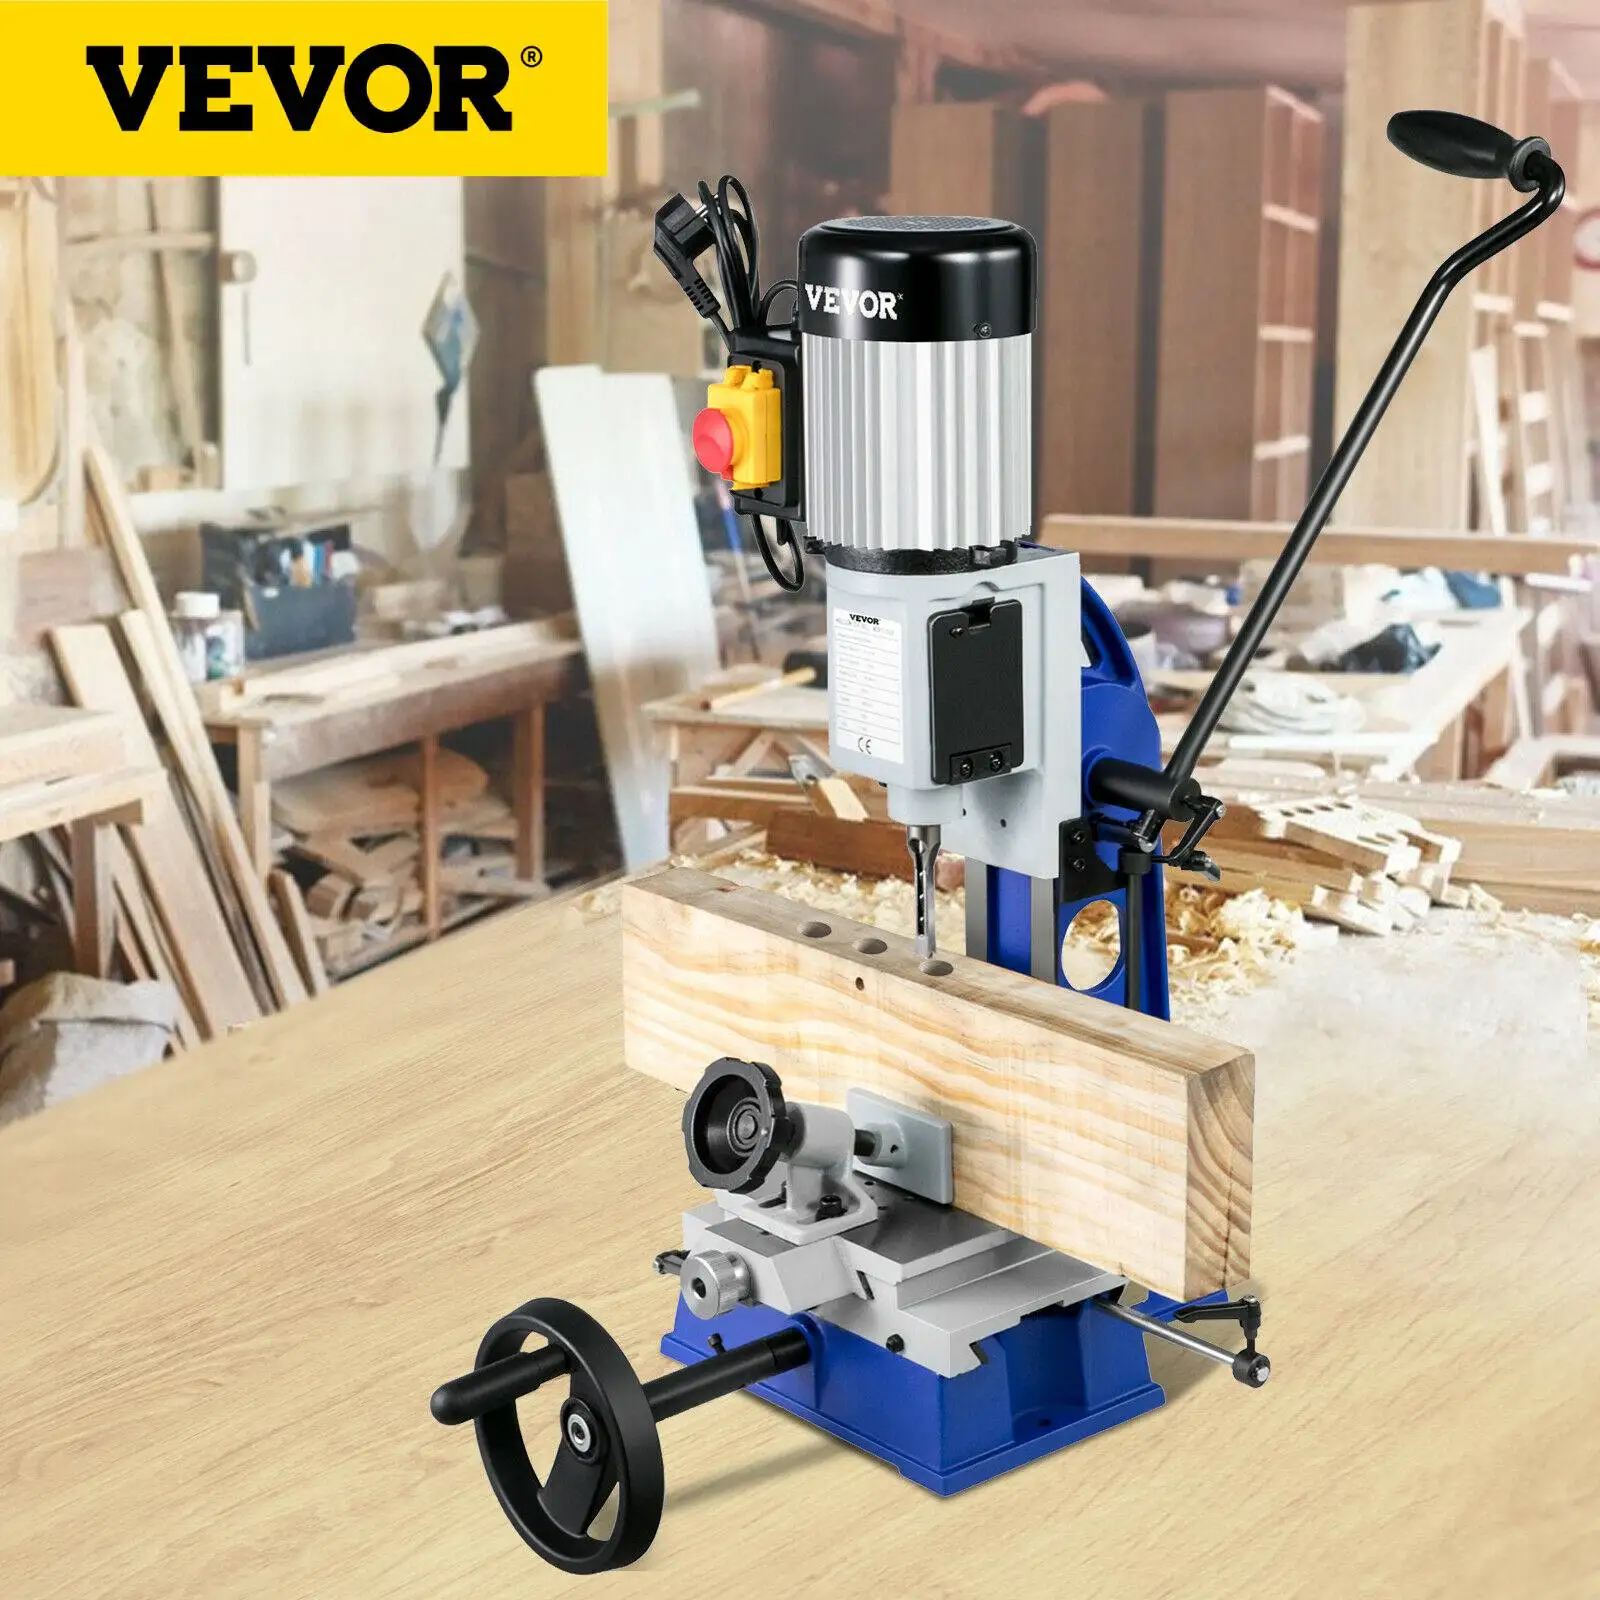 

VEVOR Benchtop Mortiser Machine Mortising Tenon Machine Square / Round Hole for Woodworking Drilling Wood Metal Milling Slotting